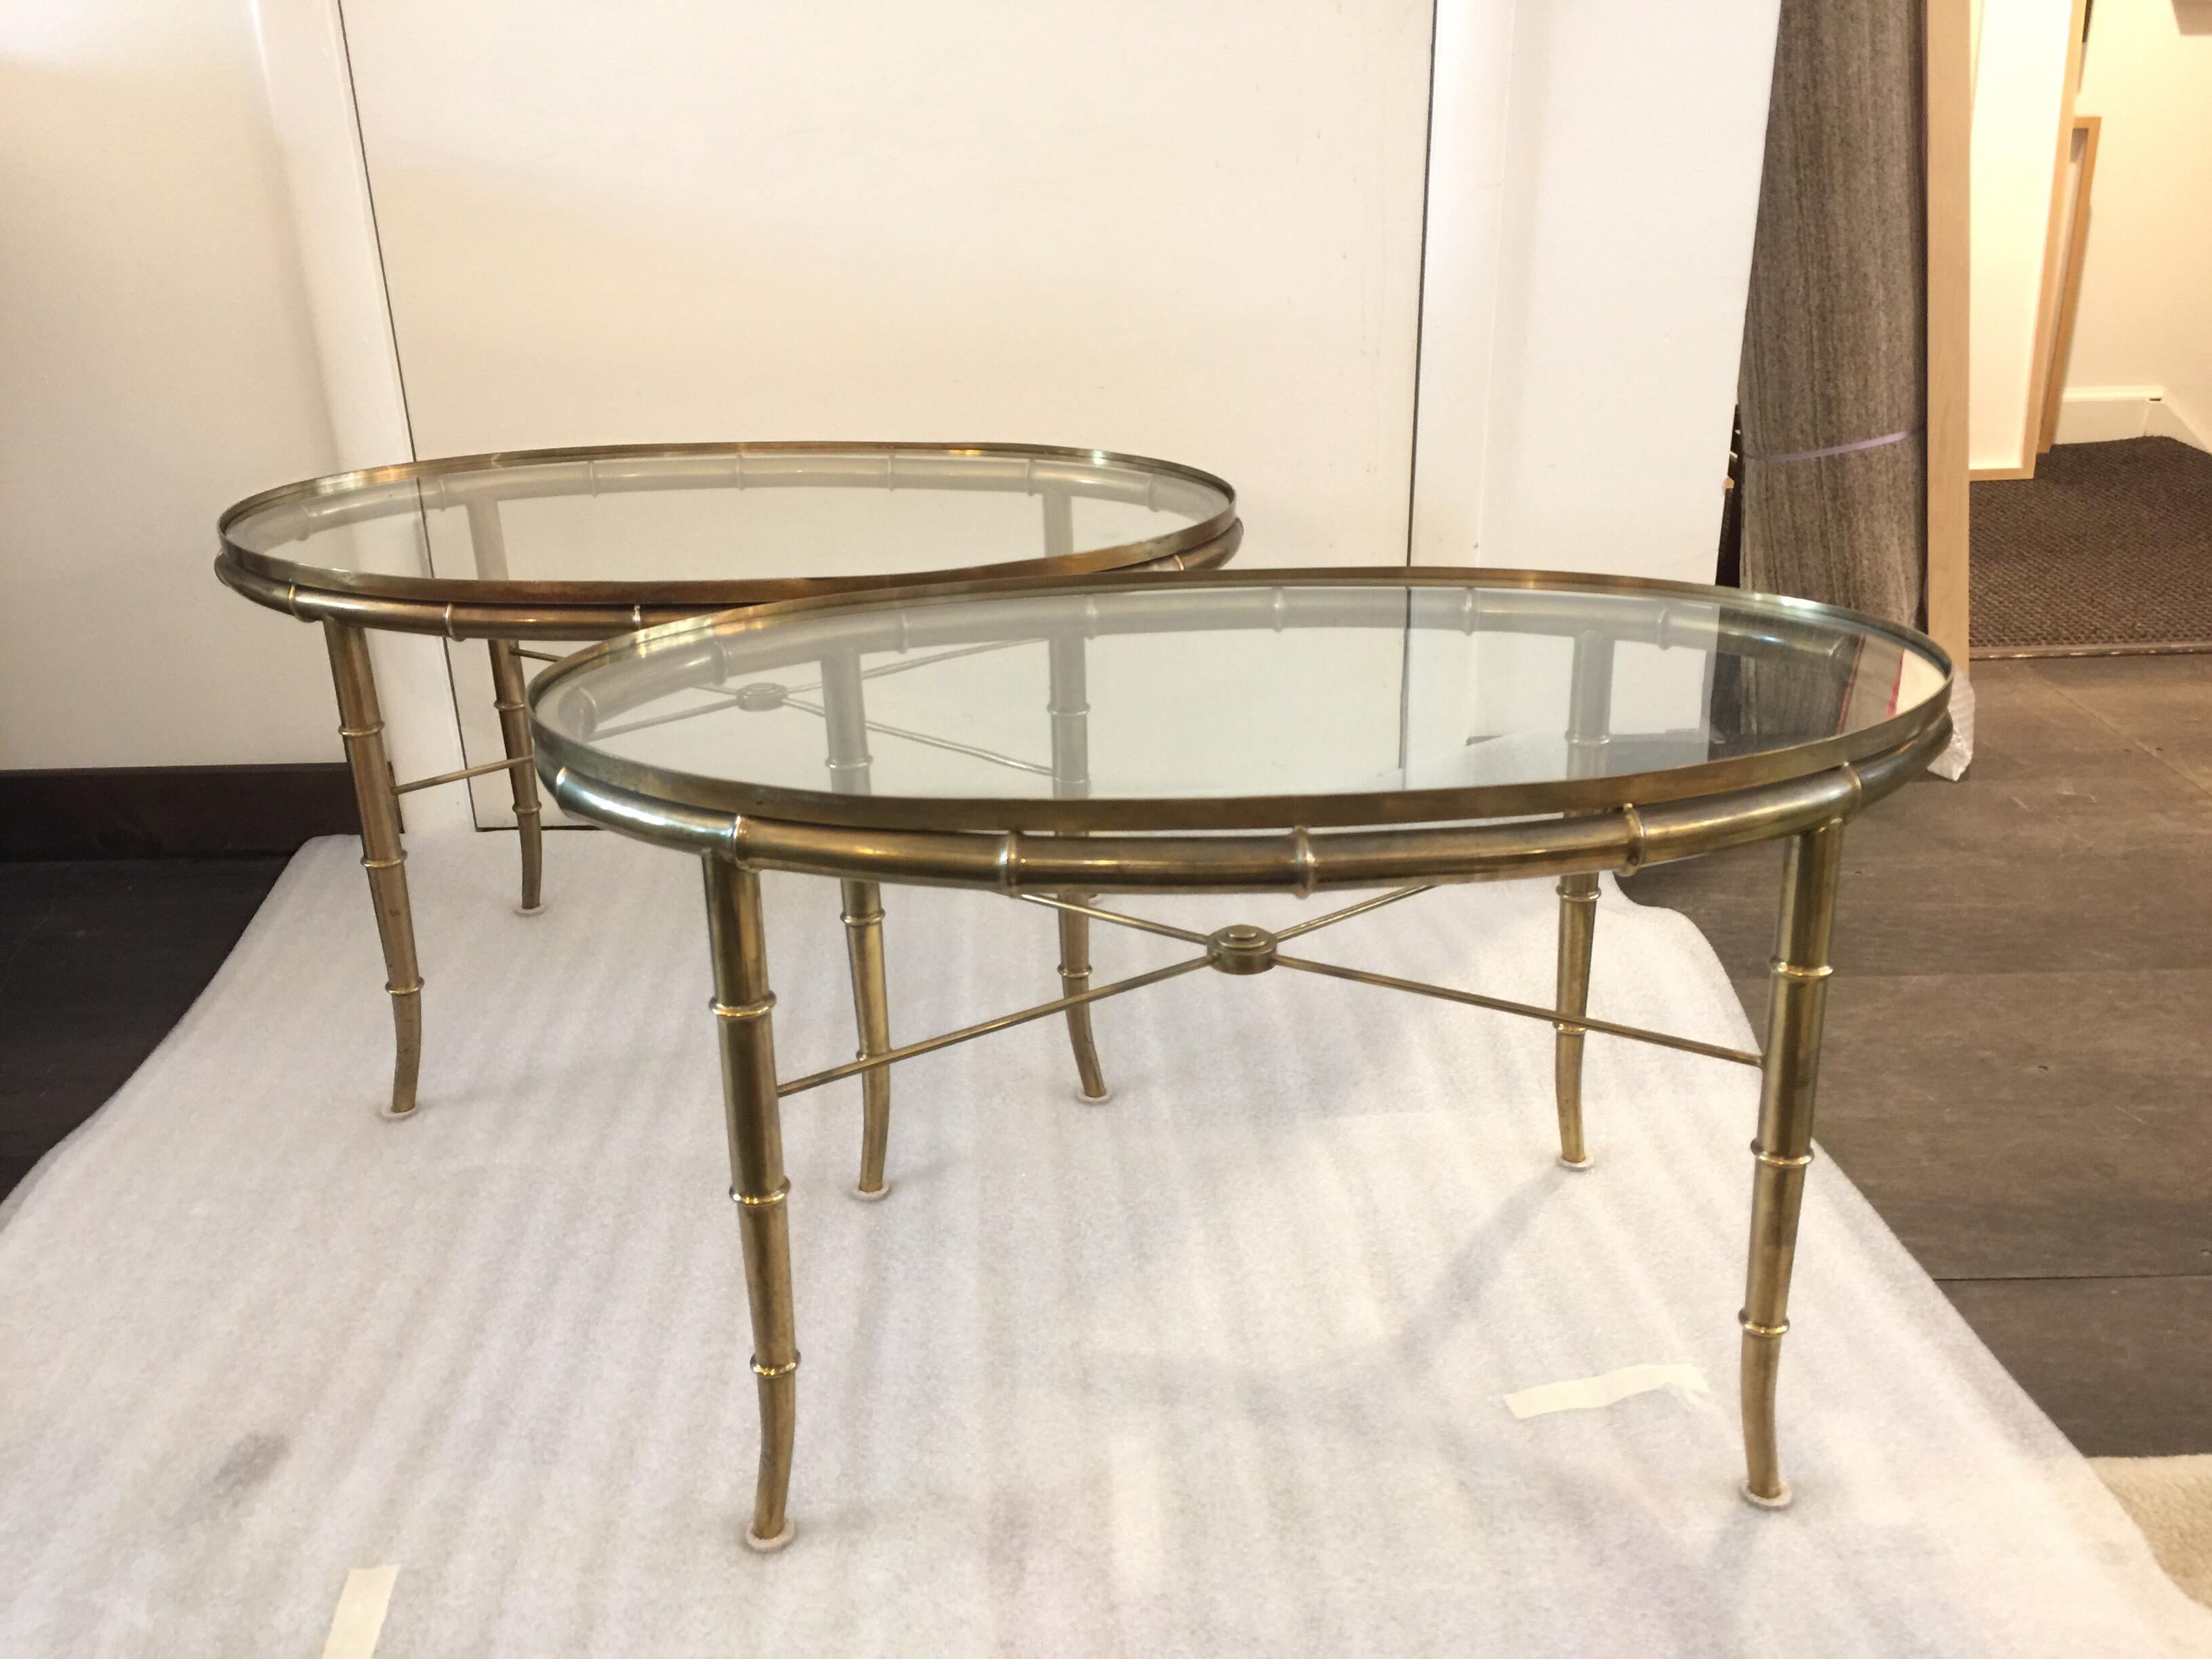 Faux bamboo legs and beautiful original brass patina, glass oval set within a brass tray style top. This is a pair.